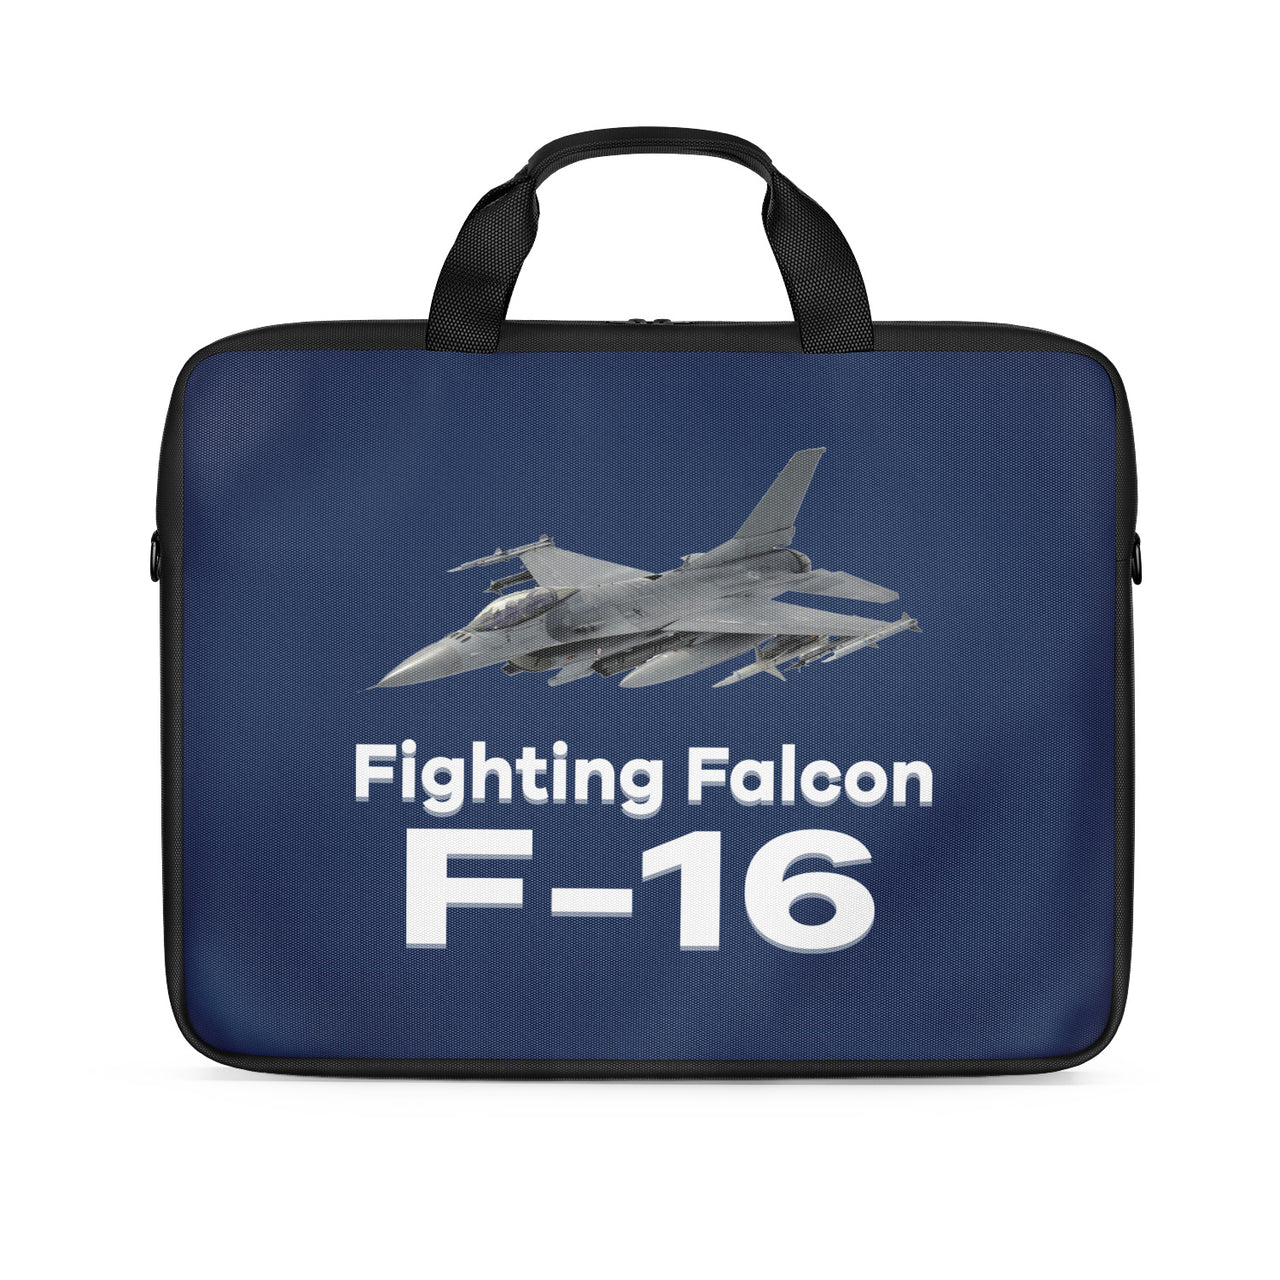 The Fighting Falcon F16 Designed Laptop & Tablet Bags